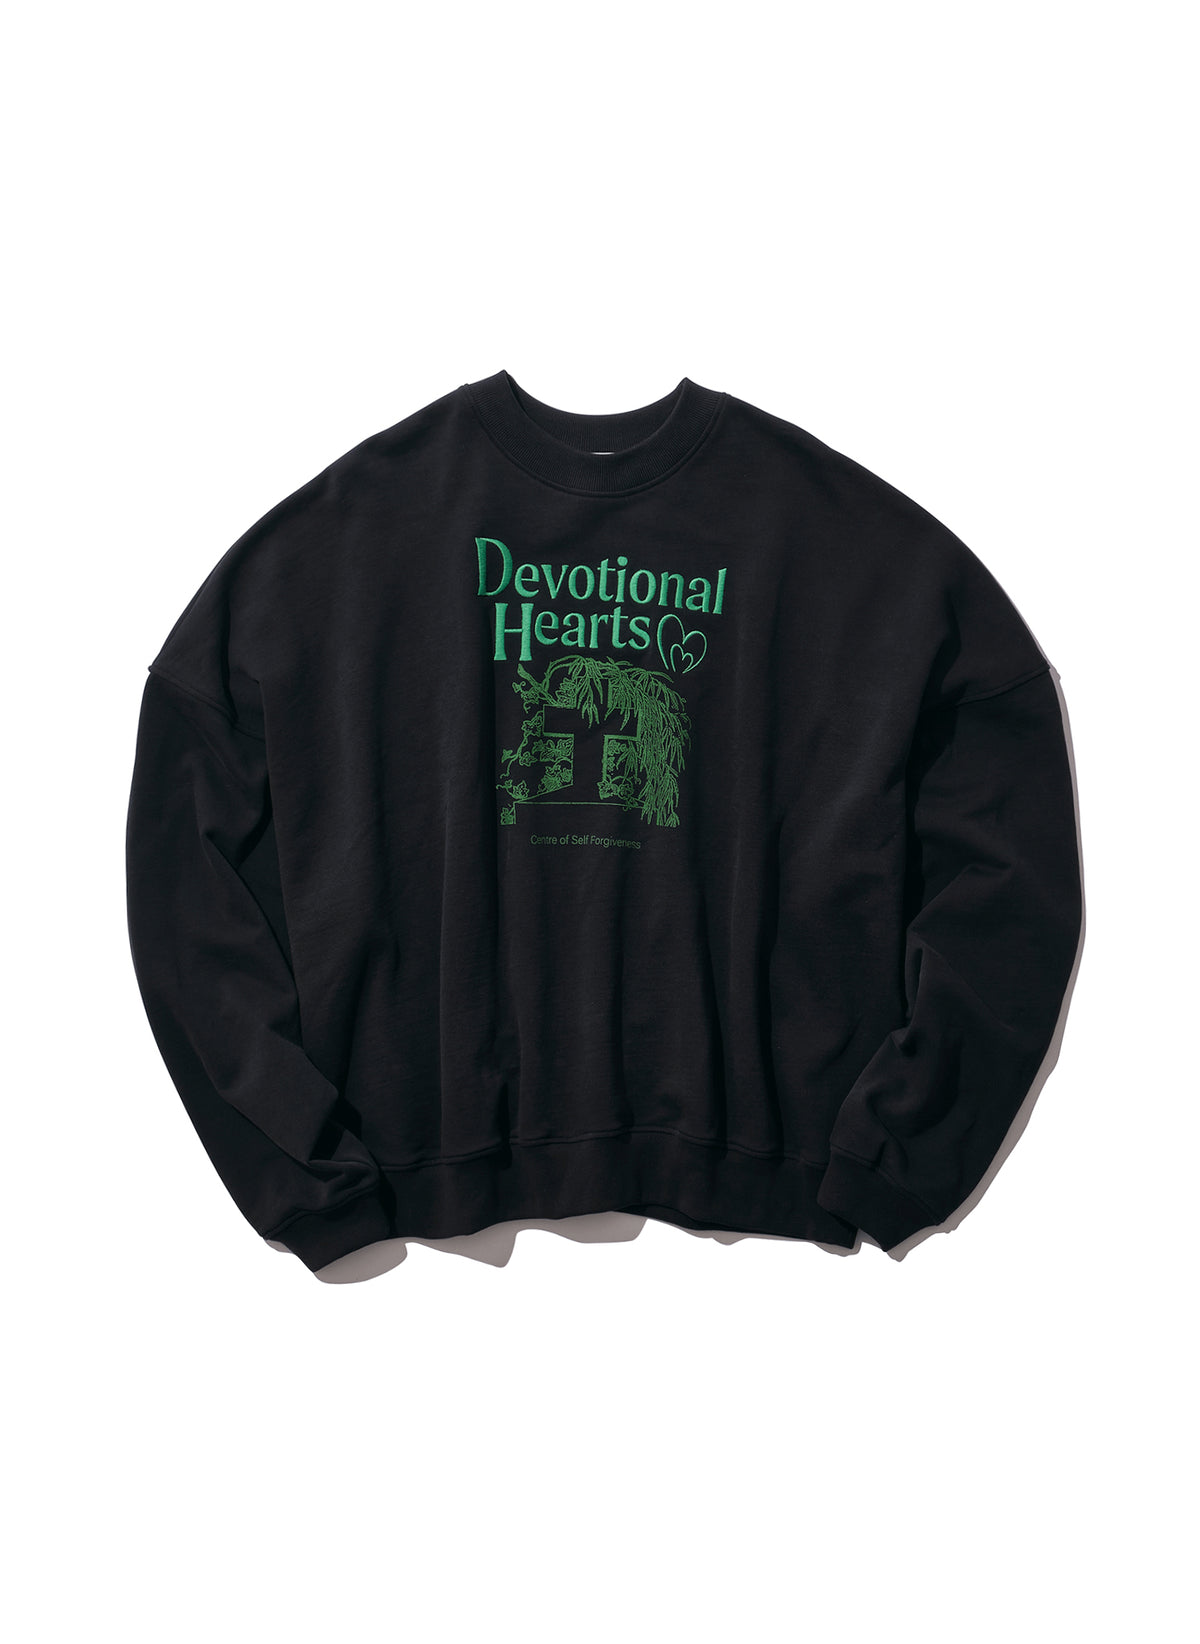 WILLY CHAVARRIA / DEVOTIONAL HEARTS BOMBER CREW SOLID BLACK